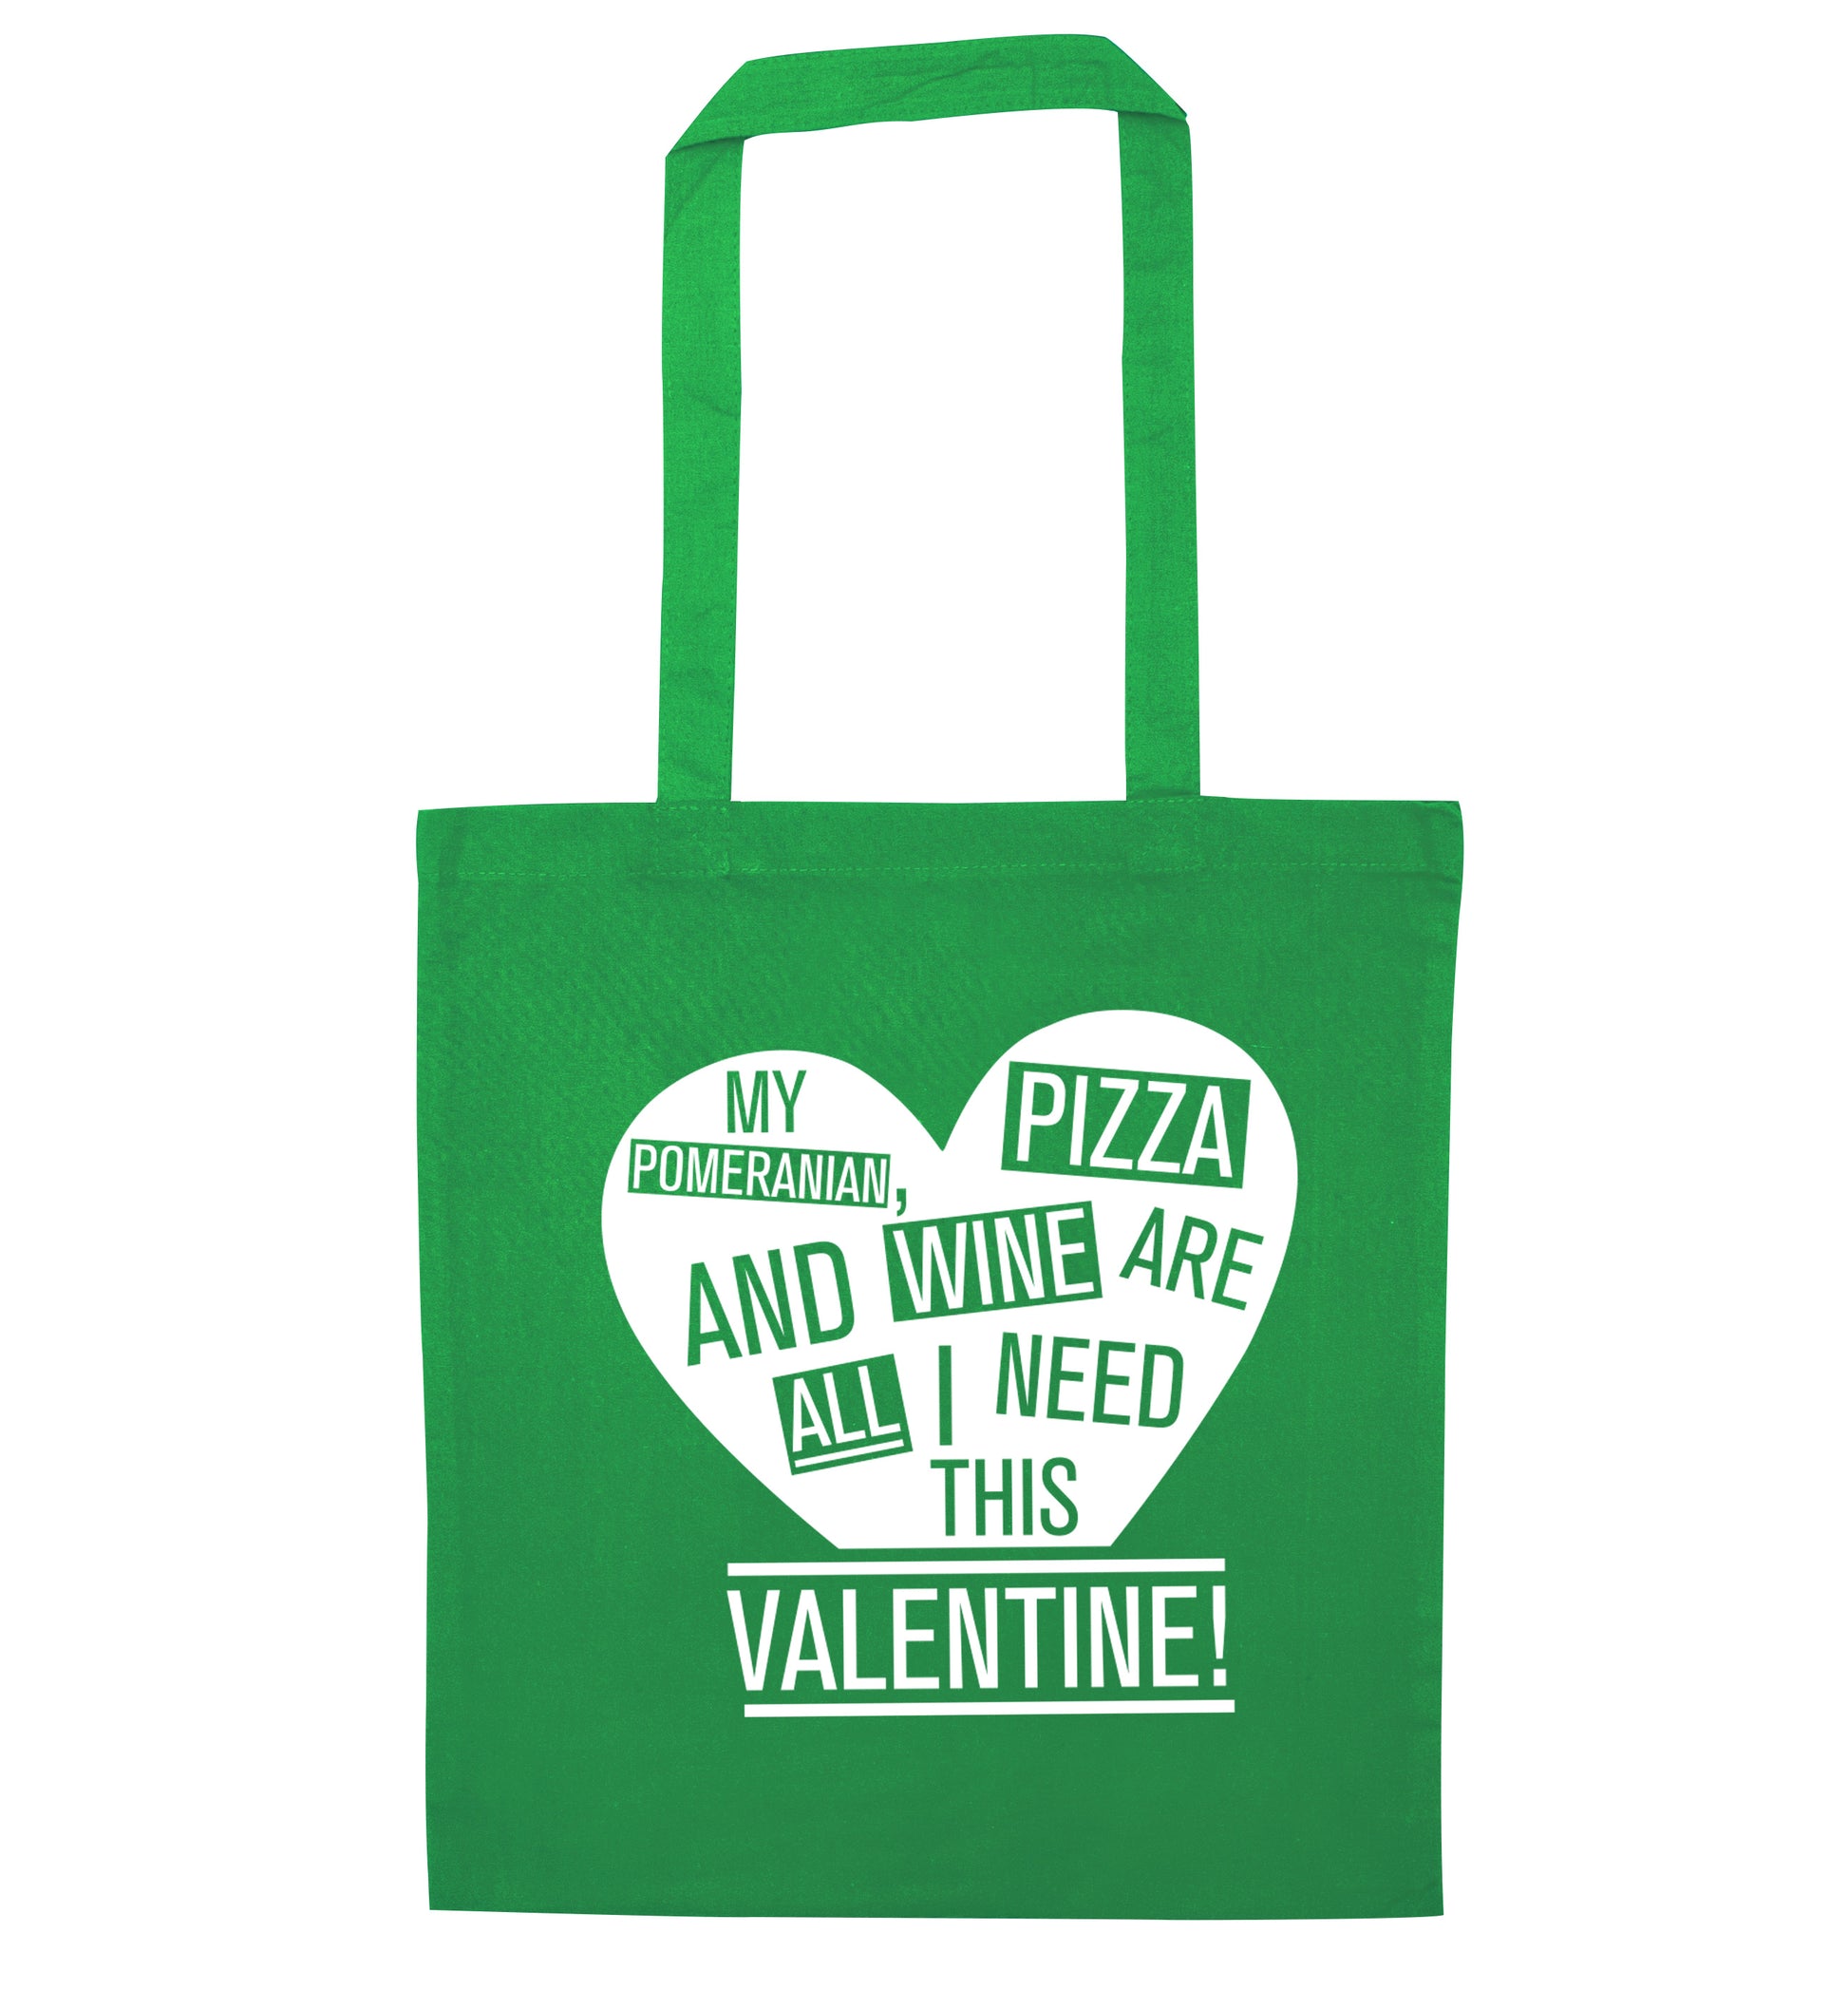 My pomeranian, chocolate and wine are all I need this valentine! green tote bag